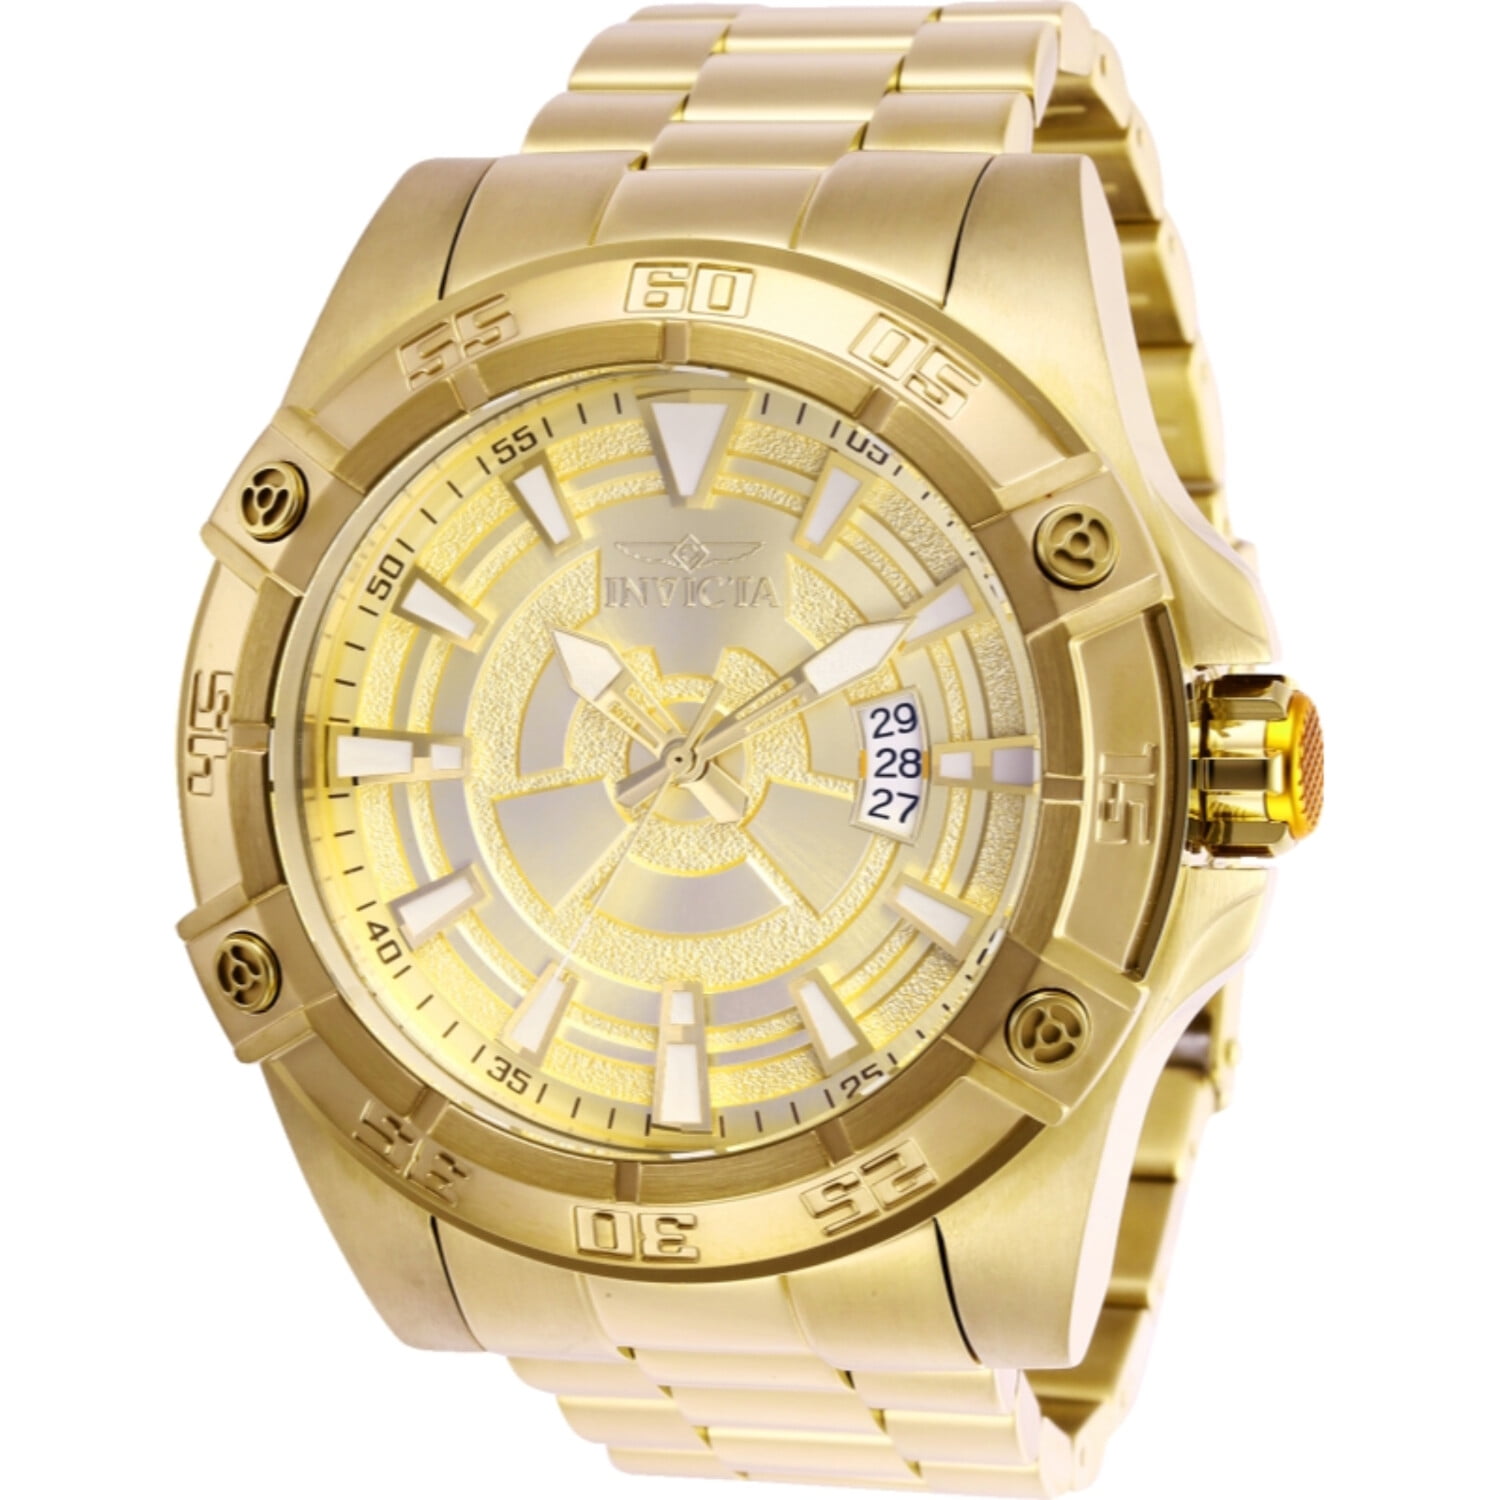 Invicta Men's Pro Diver 27010 Gold Stainless-Steel Automatic Self Wind  Diving Watch